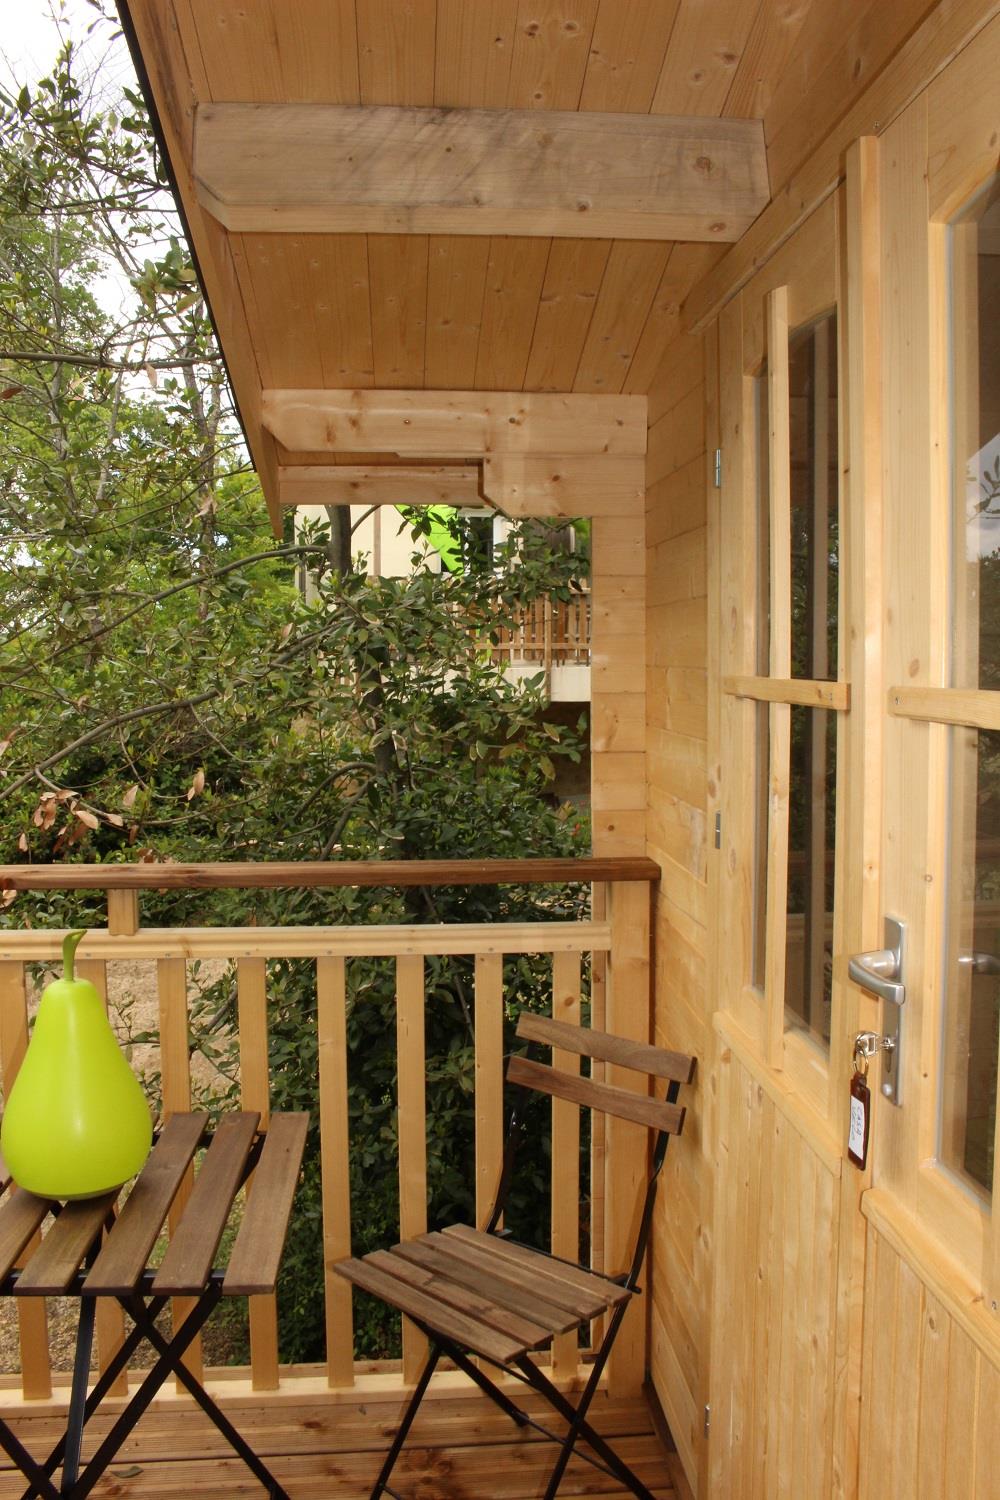 Accommodation - Wooden Cabin Kazavelo Without Toilet Block - Camping de la Colline